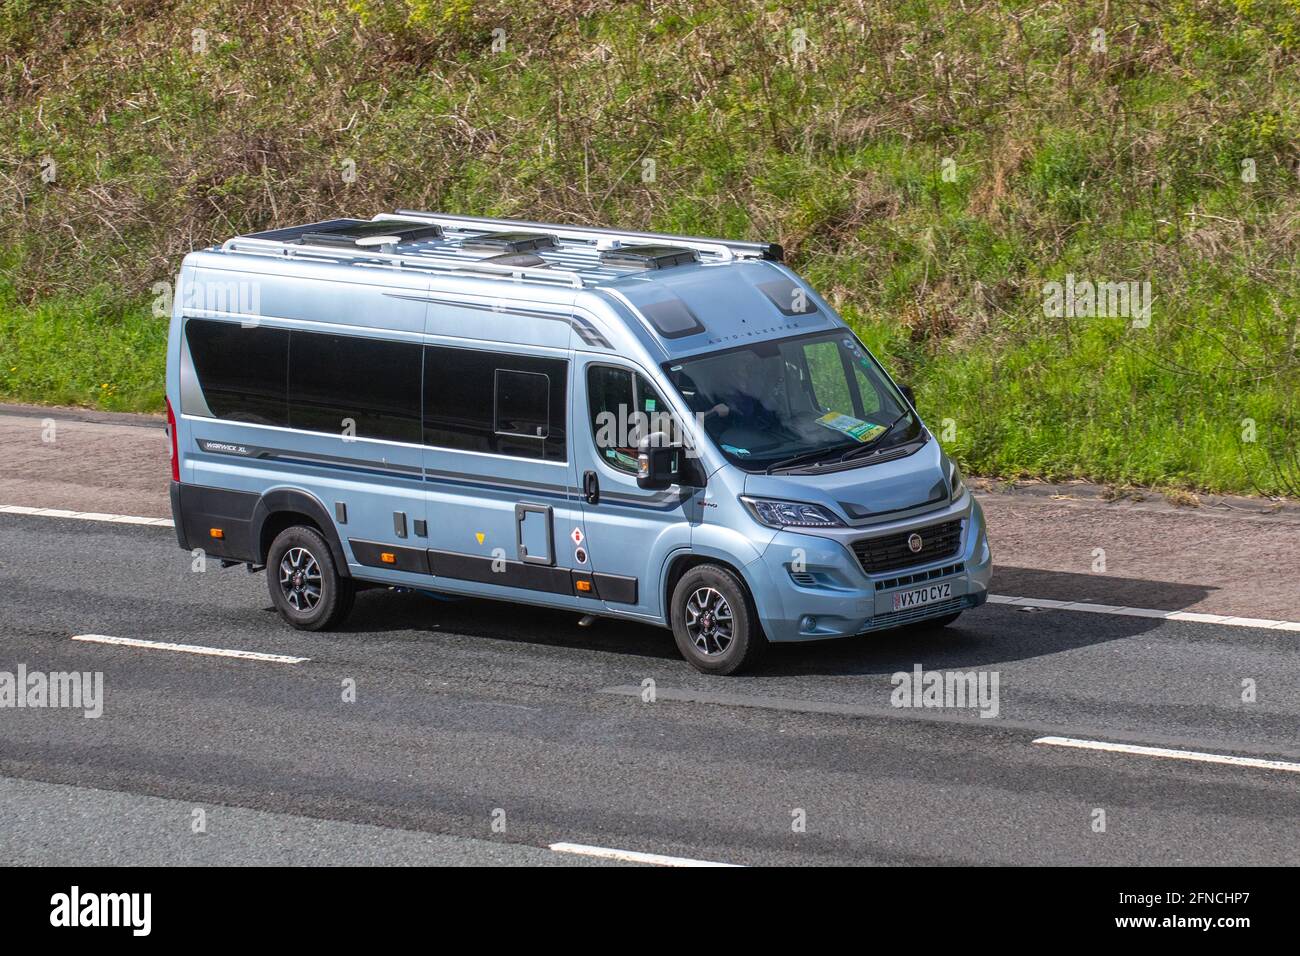 2020 Fiat Ducato Caravans and Motorhomes, campervans on Britain's roads, RV leisure vehicle, family holidays, caravanette vacations, Touring caravan holiday, van conversions, Vanagon autohome, life on the road,  auto-sleeper Stock Photo